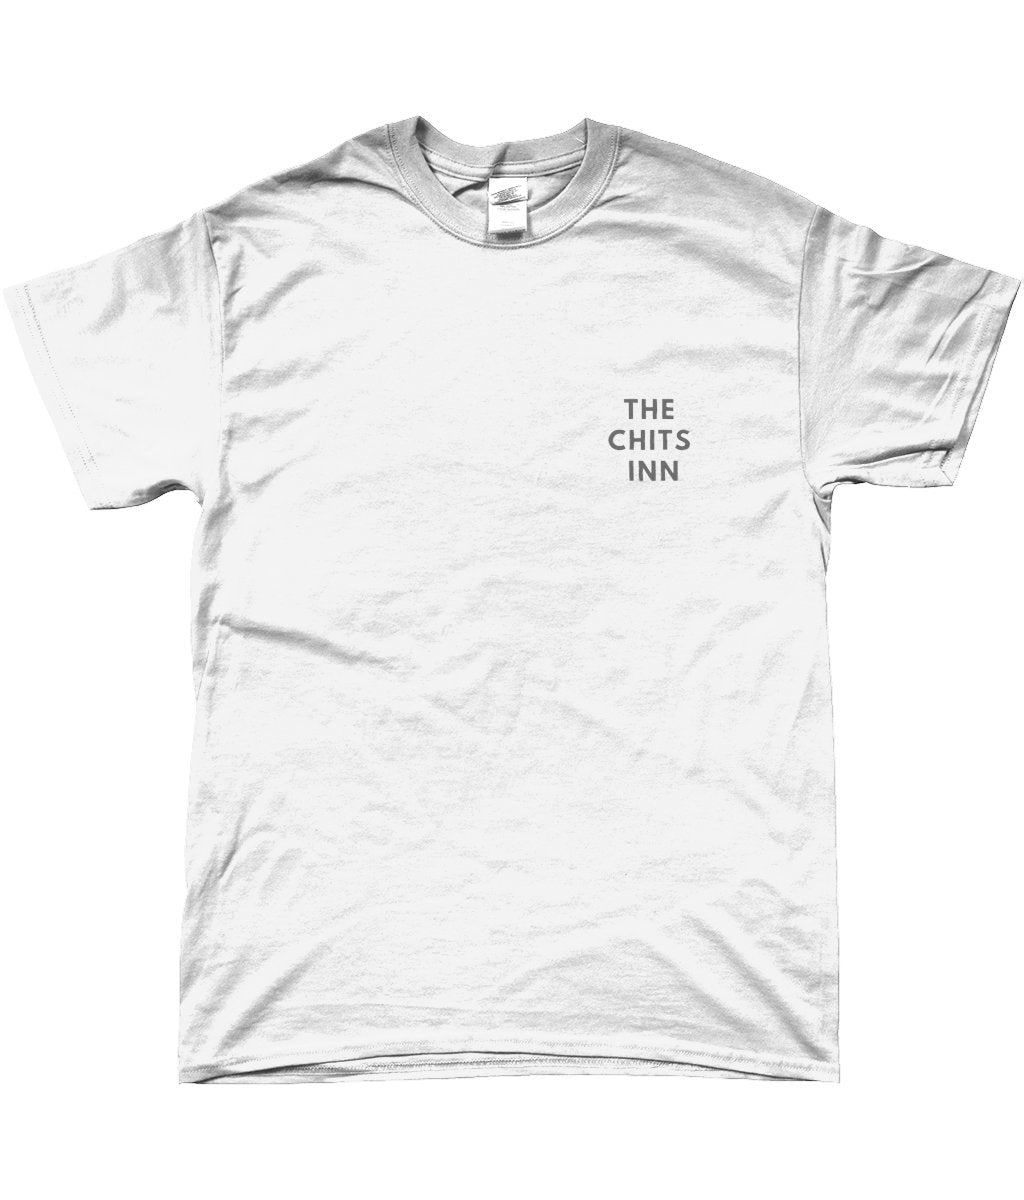 HMS Prince Of Wales Appreciation Tee - The Chits Inn